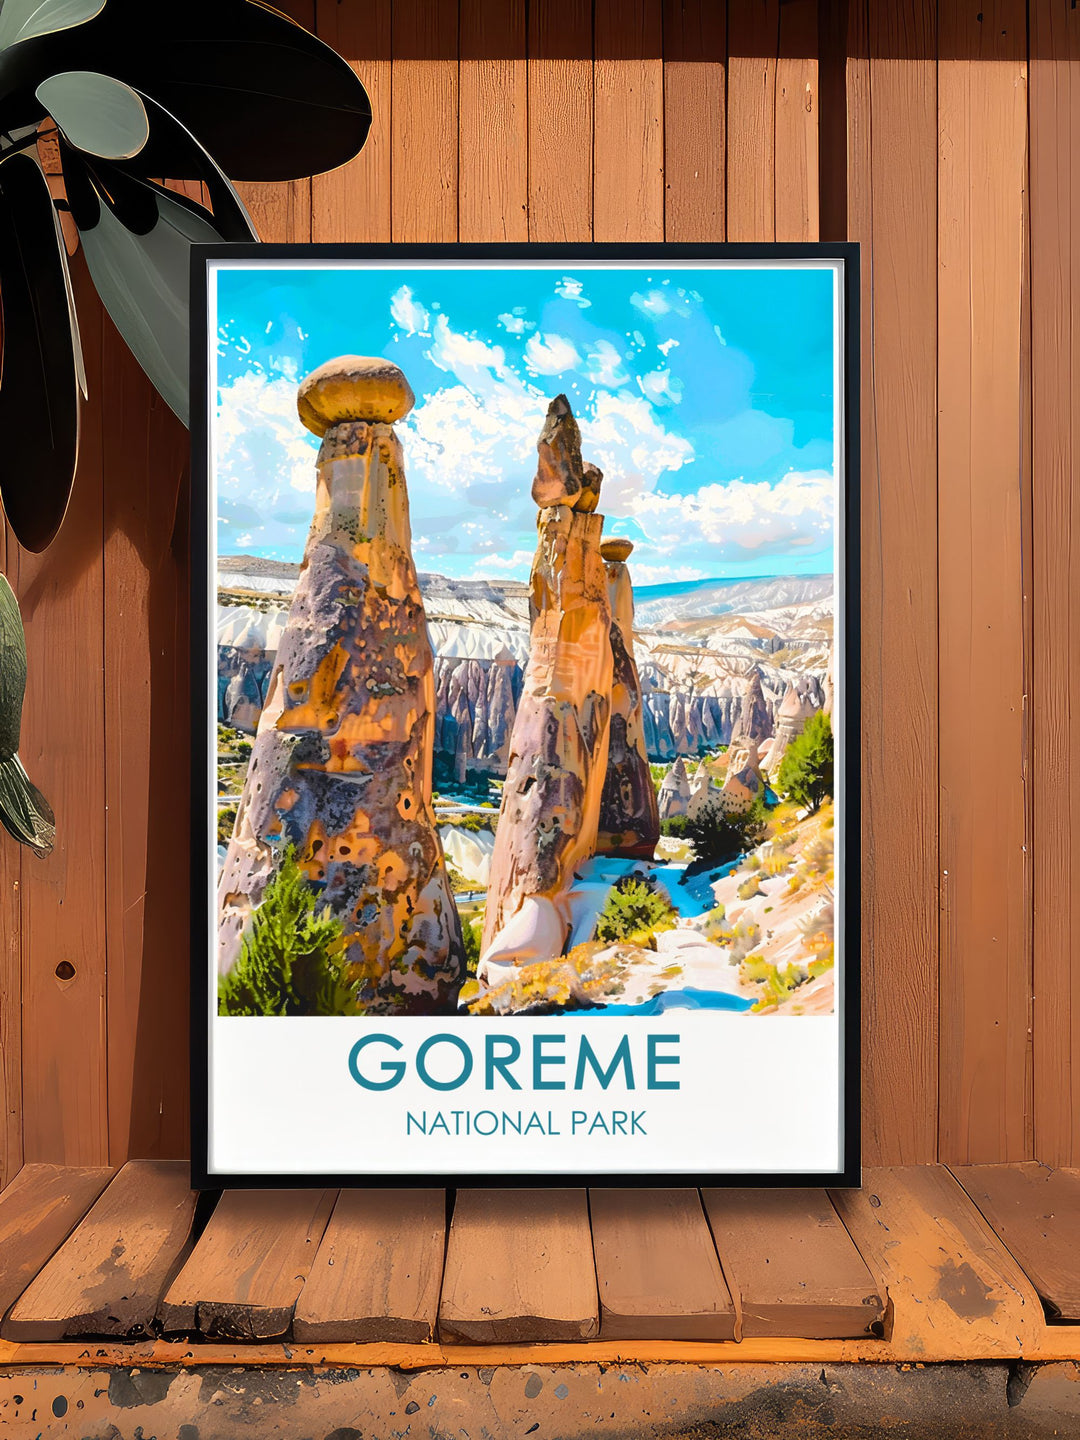 The surreal beauty of Goreme National Parks Fairy Chimneys and the colorful hot air balloons are depicted in this detailed poster, making it an excellent piece for those who appreciate the unique landscapes of Turkey.